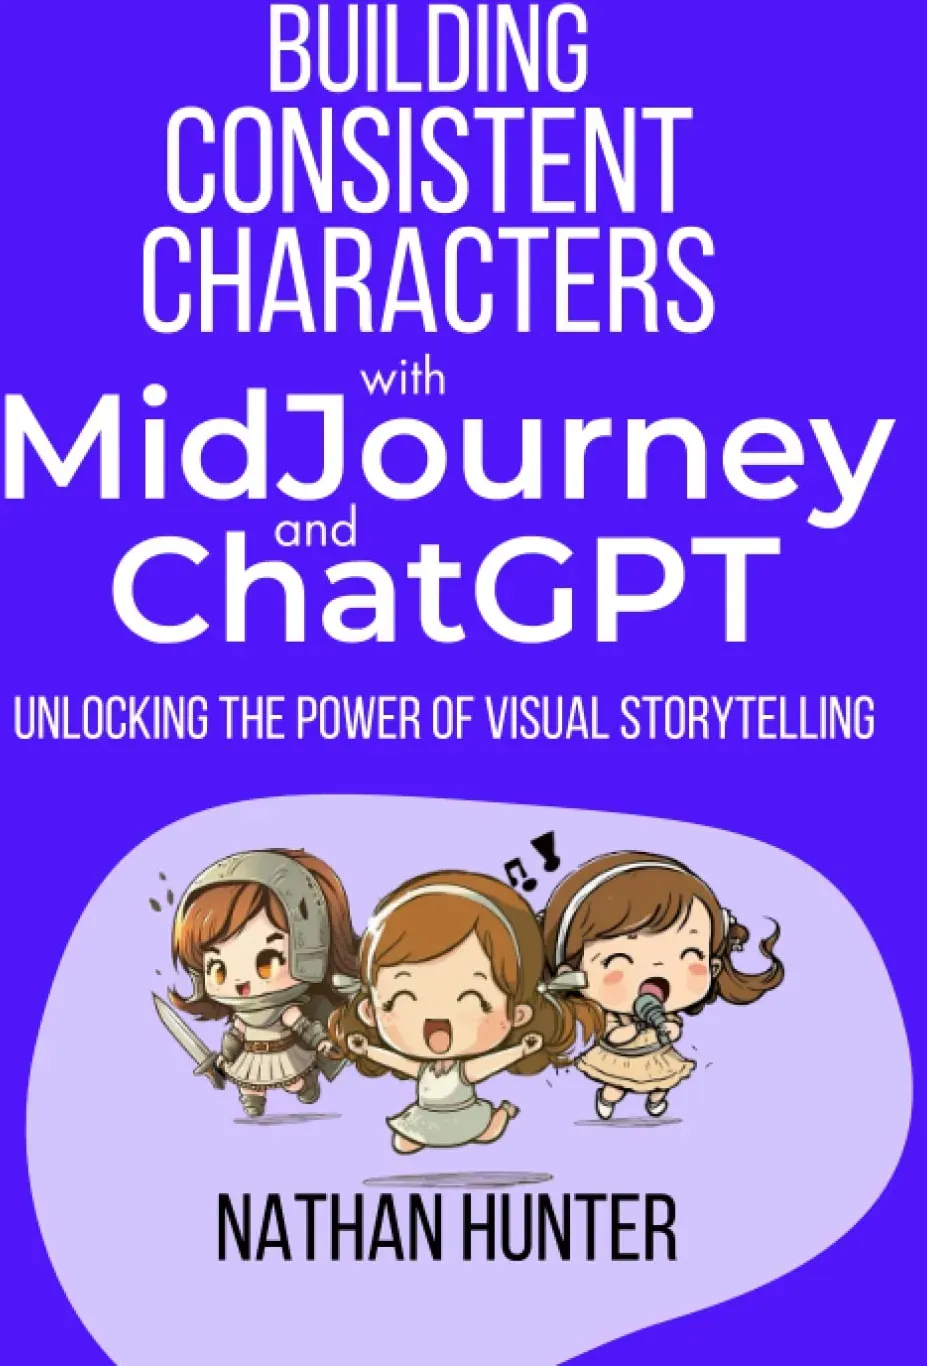 Building Consistent Characters with MidJourney and ChatGPT: Unlocking the Power of Visual Storytelling (Learn AI Tools the Fun Way!, Band 1)